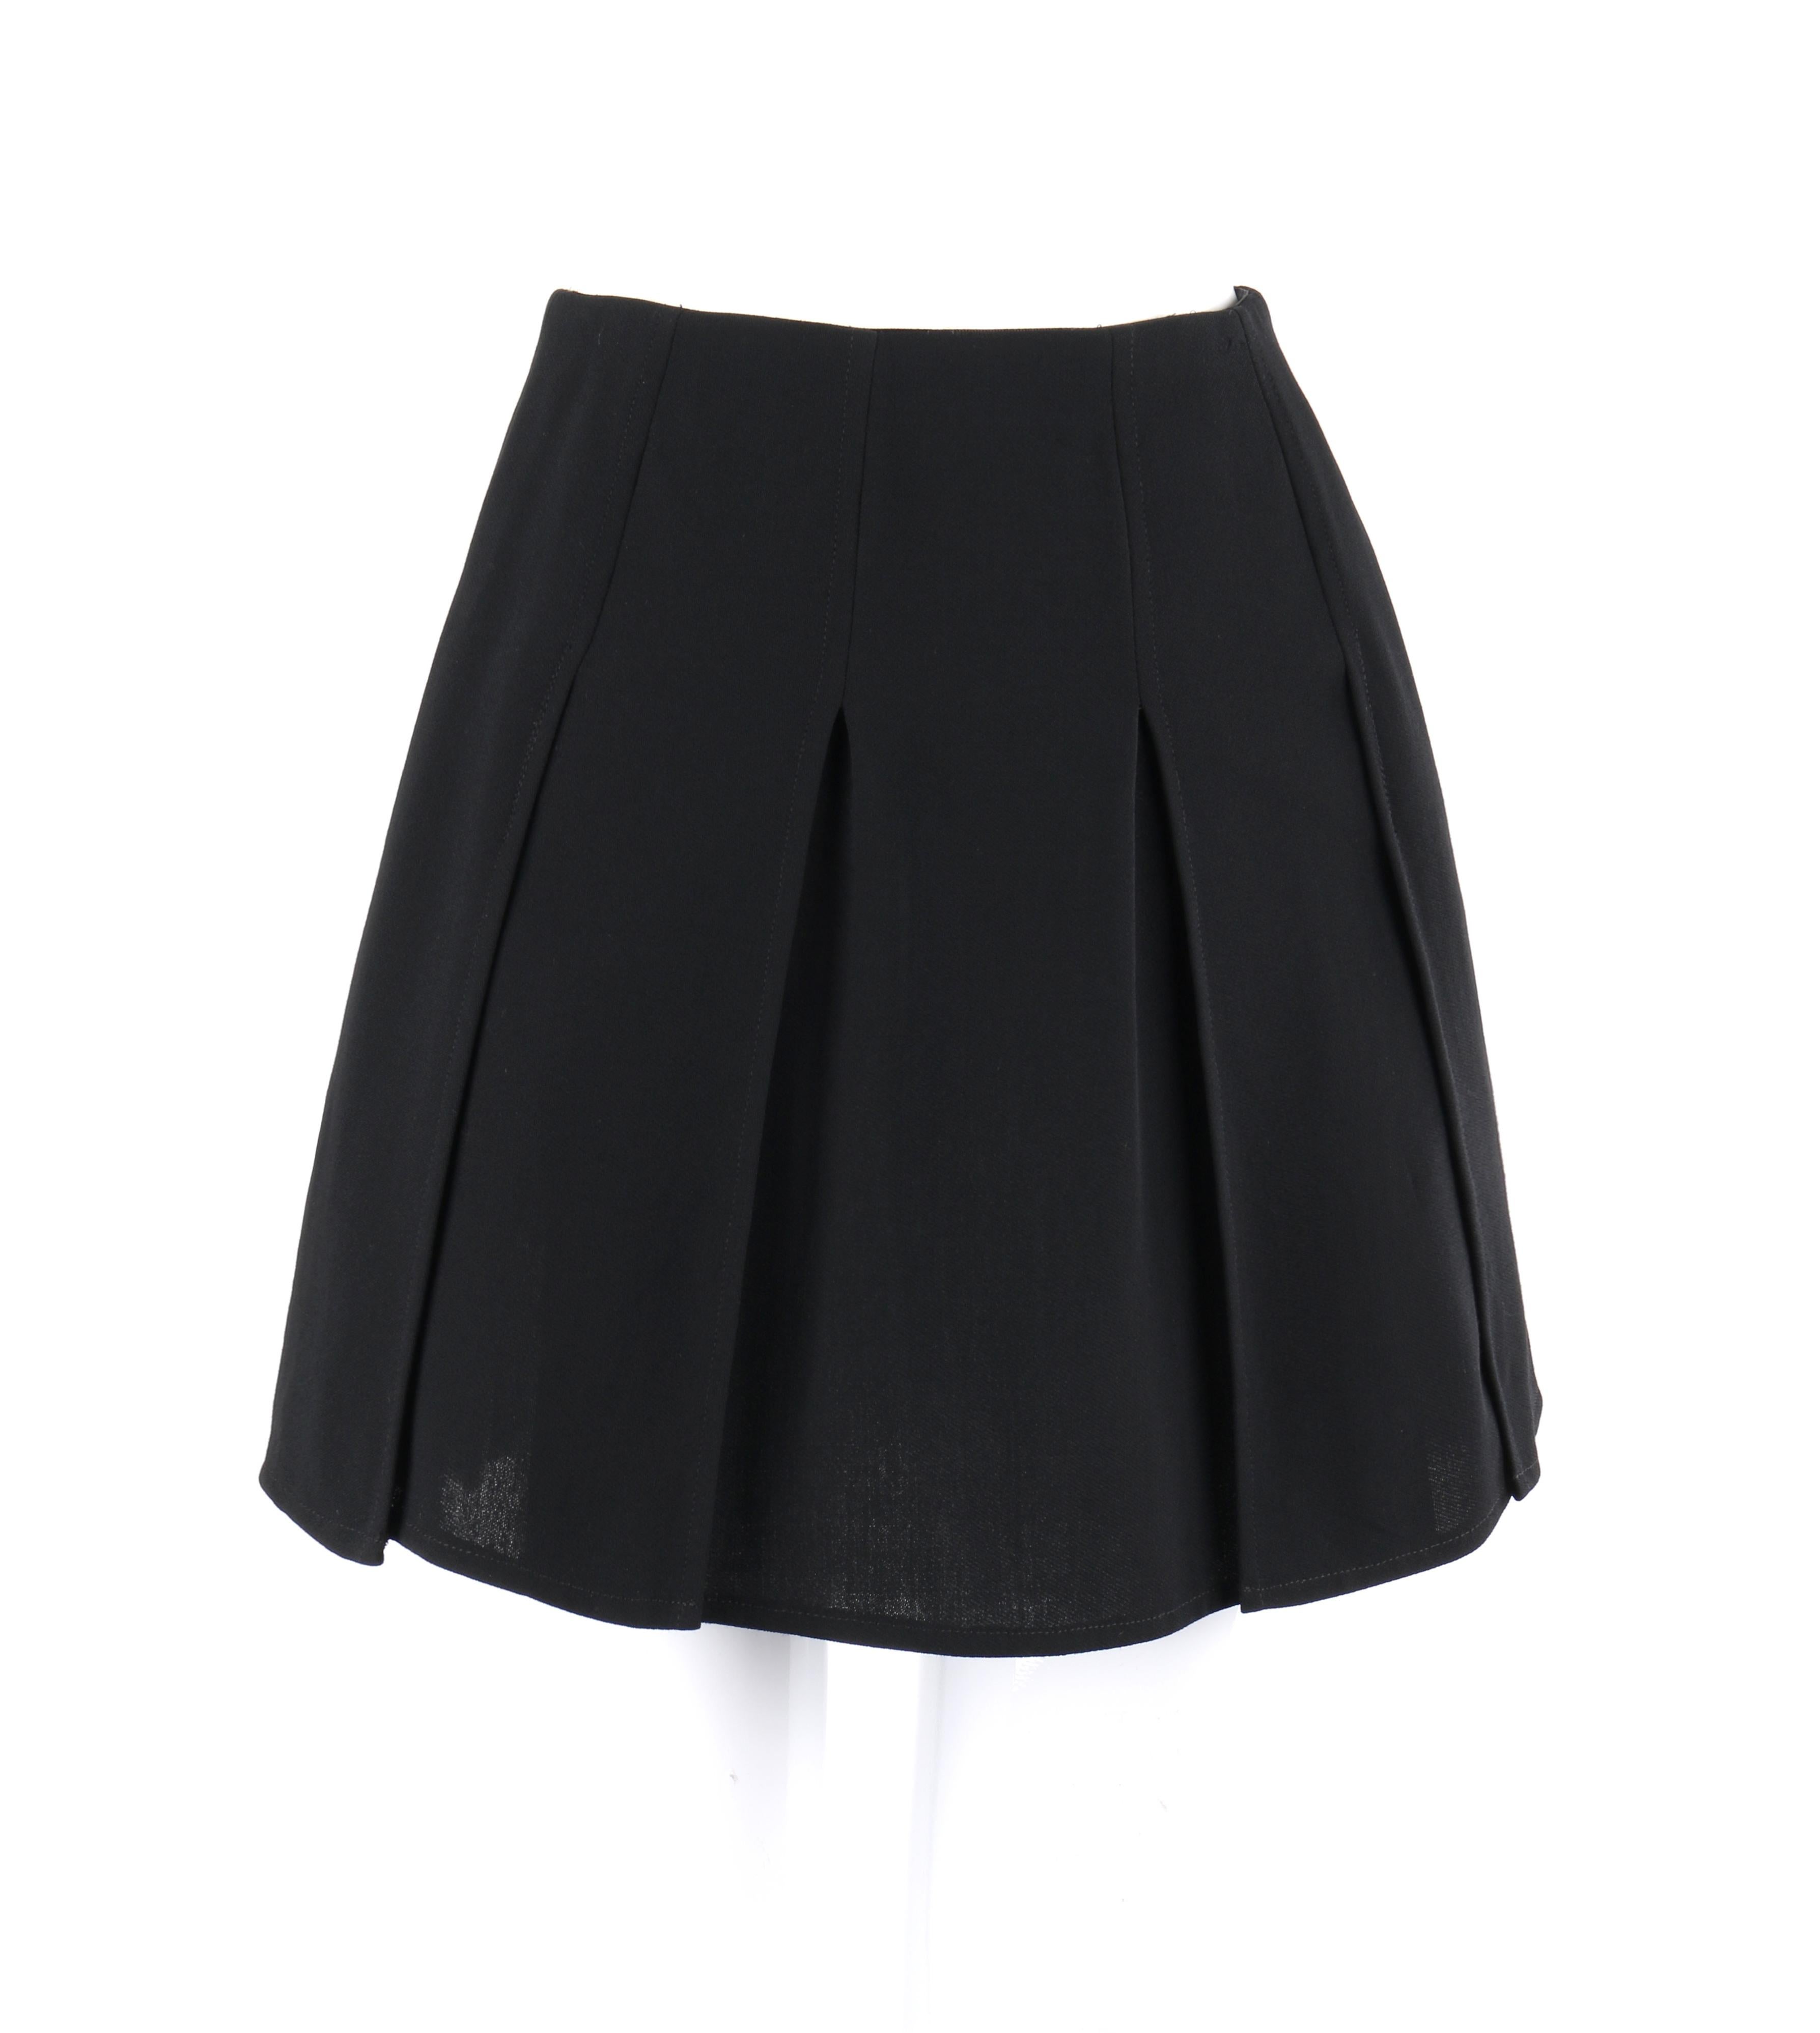 CHANEL c.1980’s Boutique Classic Black Wool Panel Pleated Mini Skirt
 
Circa: 1980’s
Label(s): Chanel Boutique
Style: Mini skirt
Color(s): Black
Lined: No 
Unmarked Fabric Content: Wool 
Additional Details / Inclusions: individual panels; pleated;